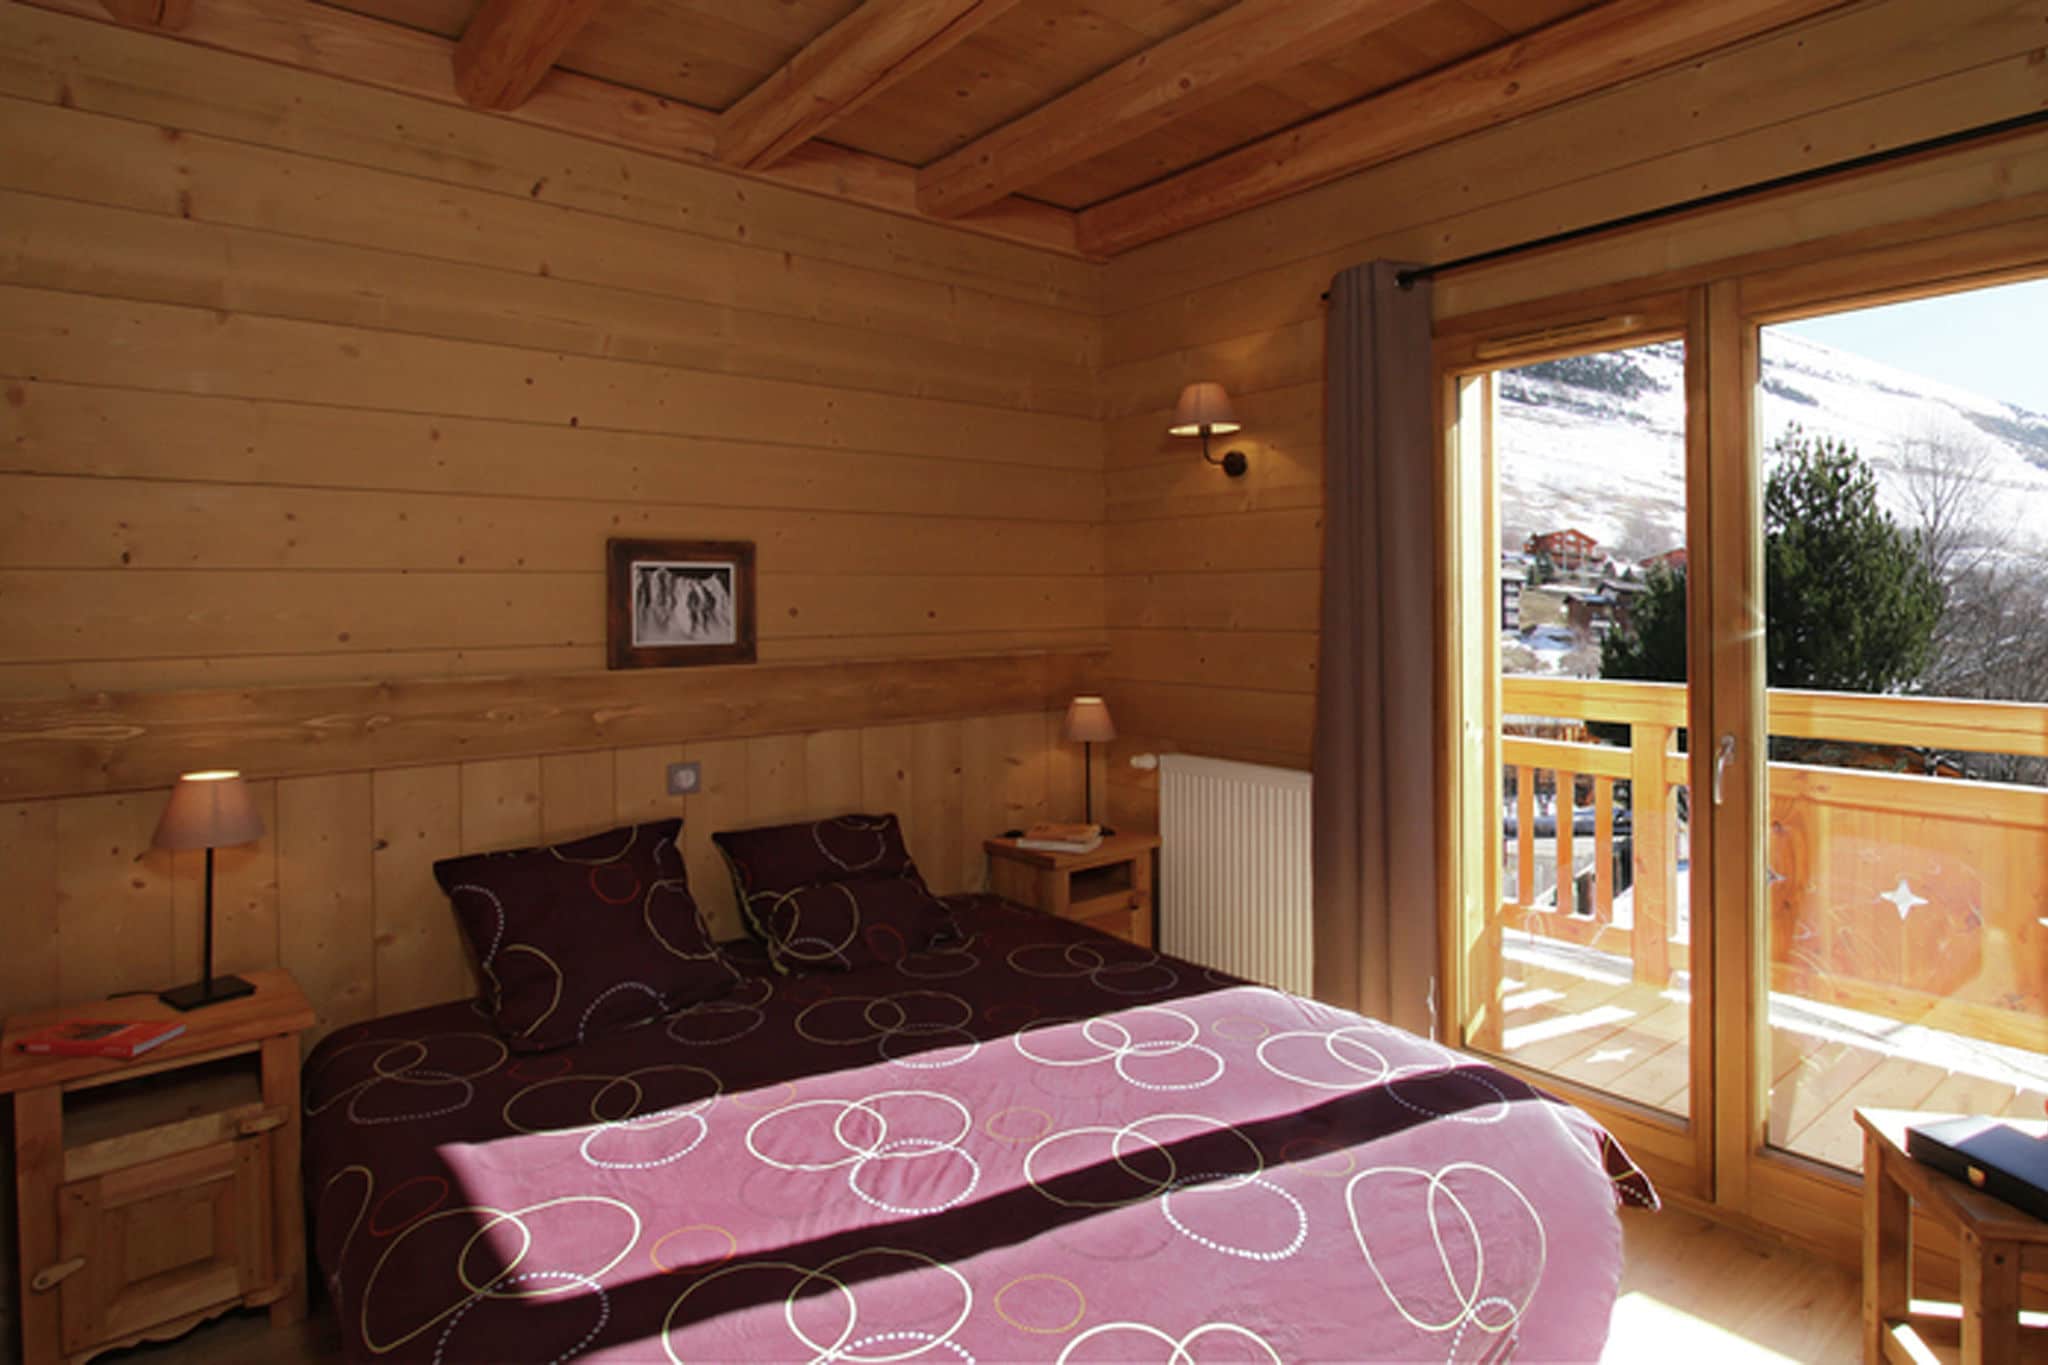 Detached chalet with a fireplace, just 50 m. from the slopes